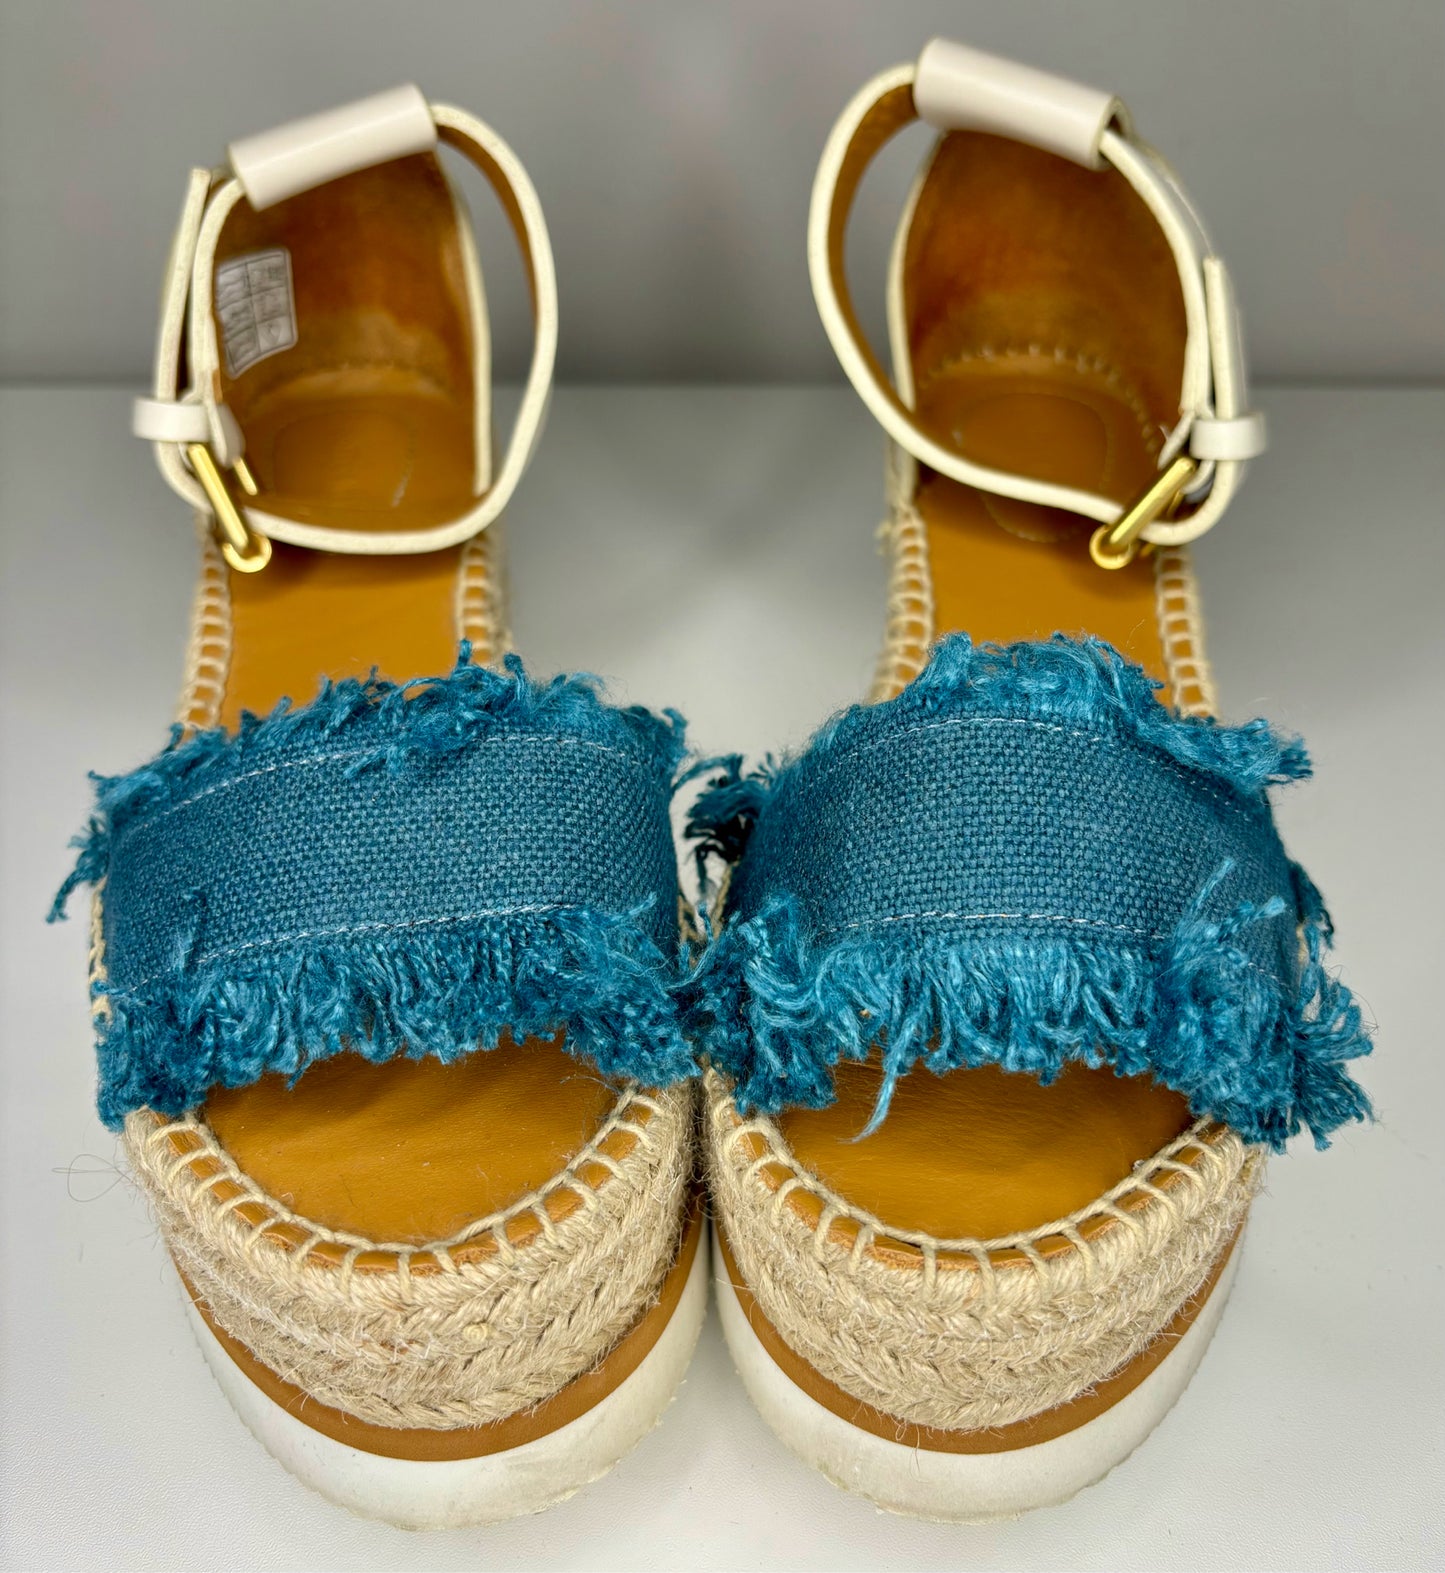 See by Chloe Turquoise Canvas Sandals